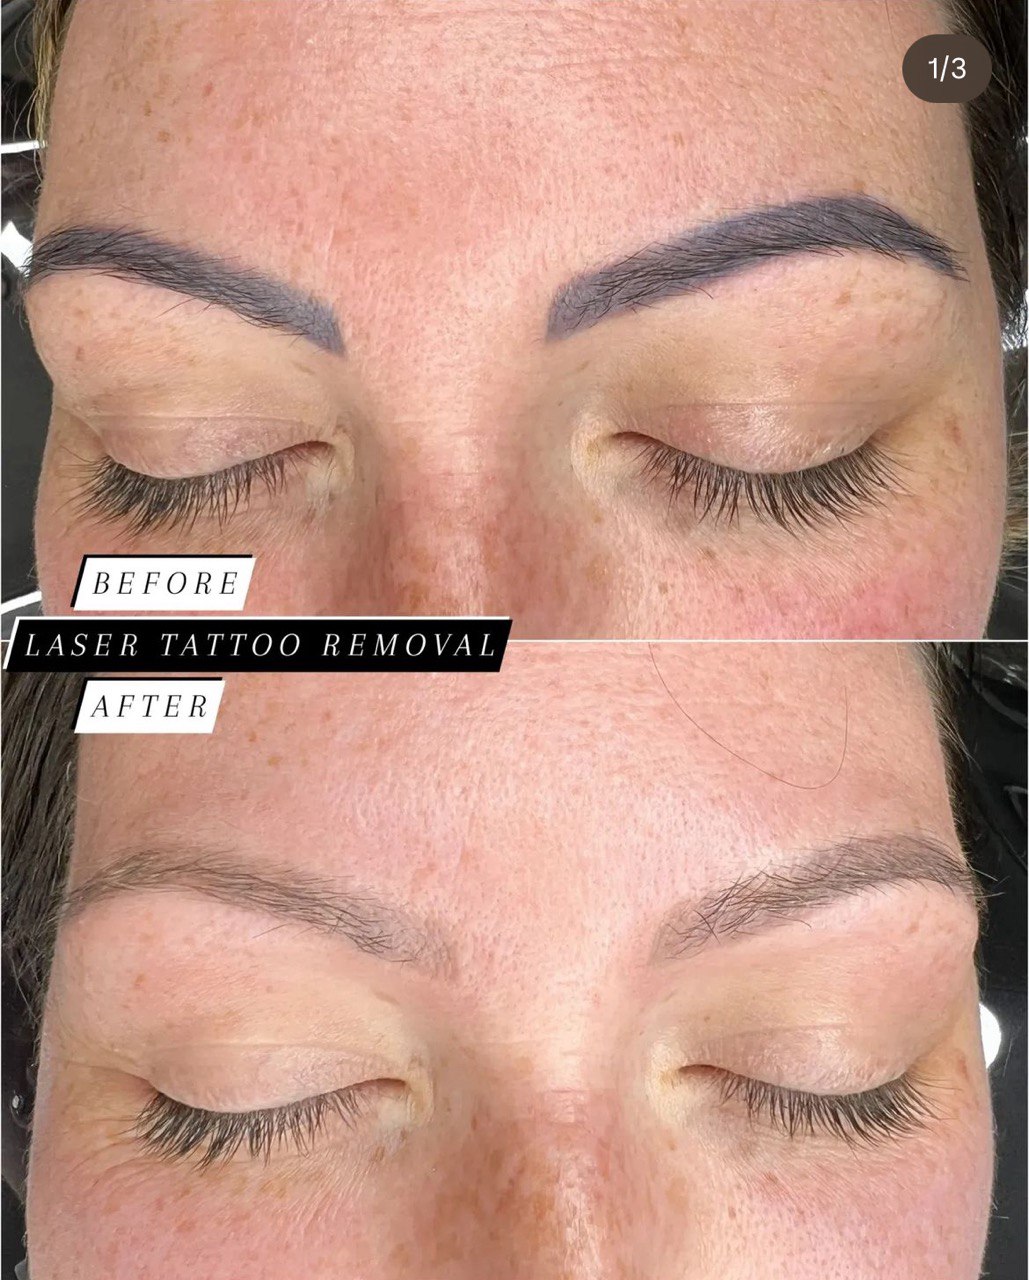 Brows Laser Tattoo Removal. Cosmetic and Mediical Tattoo by Dasha. Permanent makeup and reconstructive tattoo, scalp micro-pigmentation in Christchurch, New Zealand